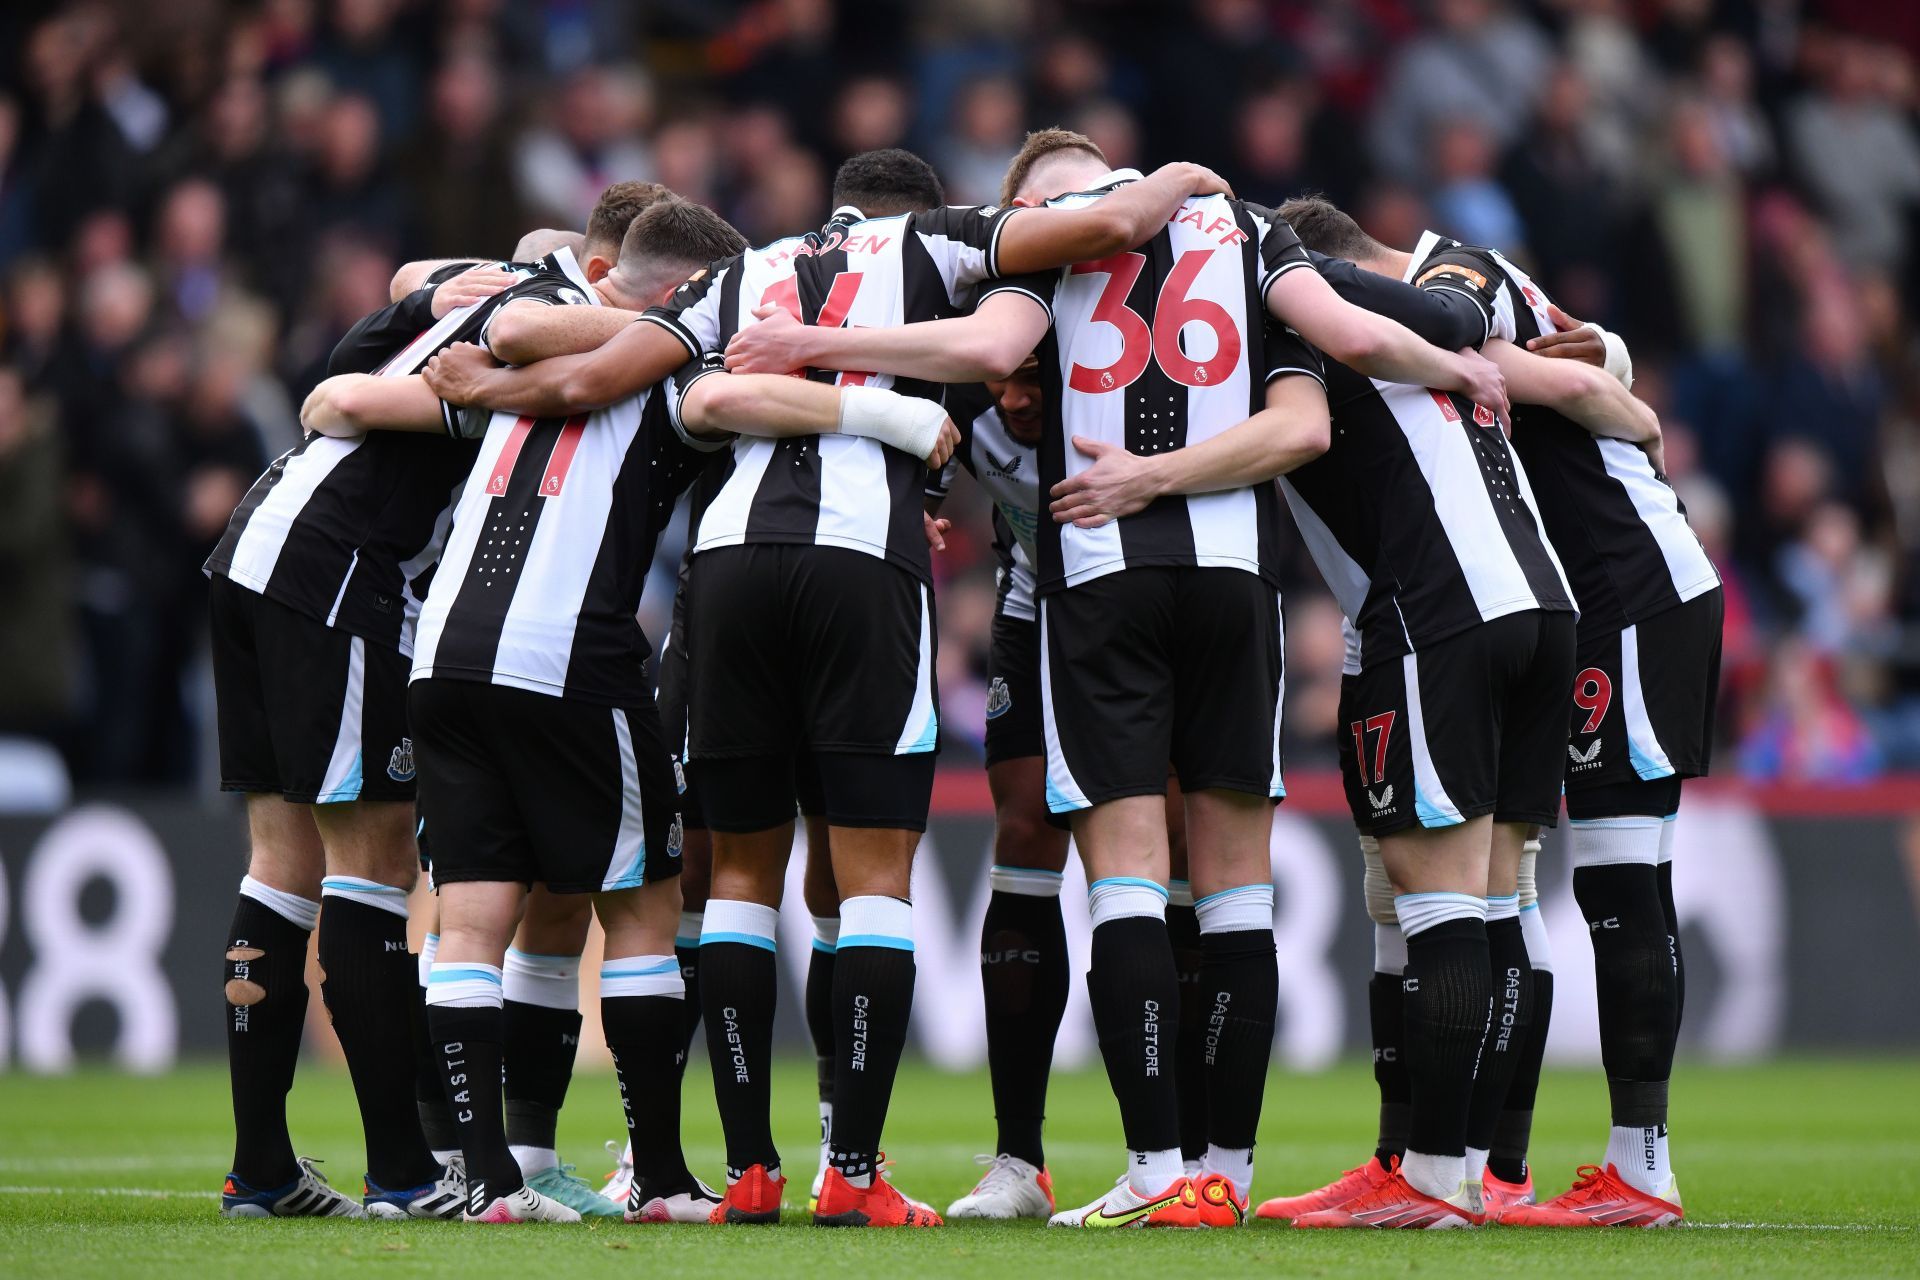 Newcastle United are looking for their first win of the season